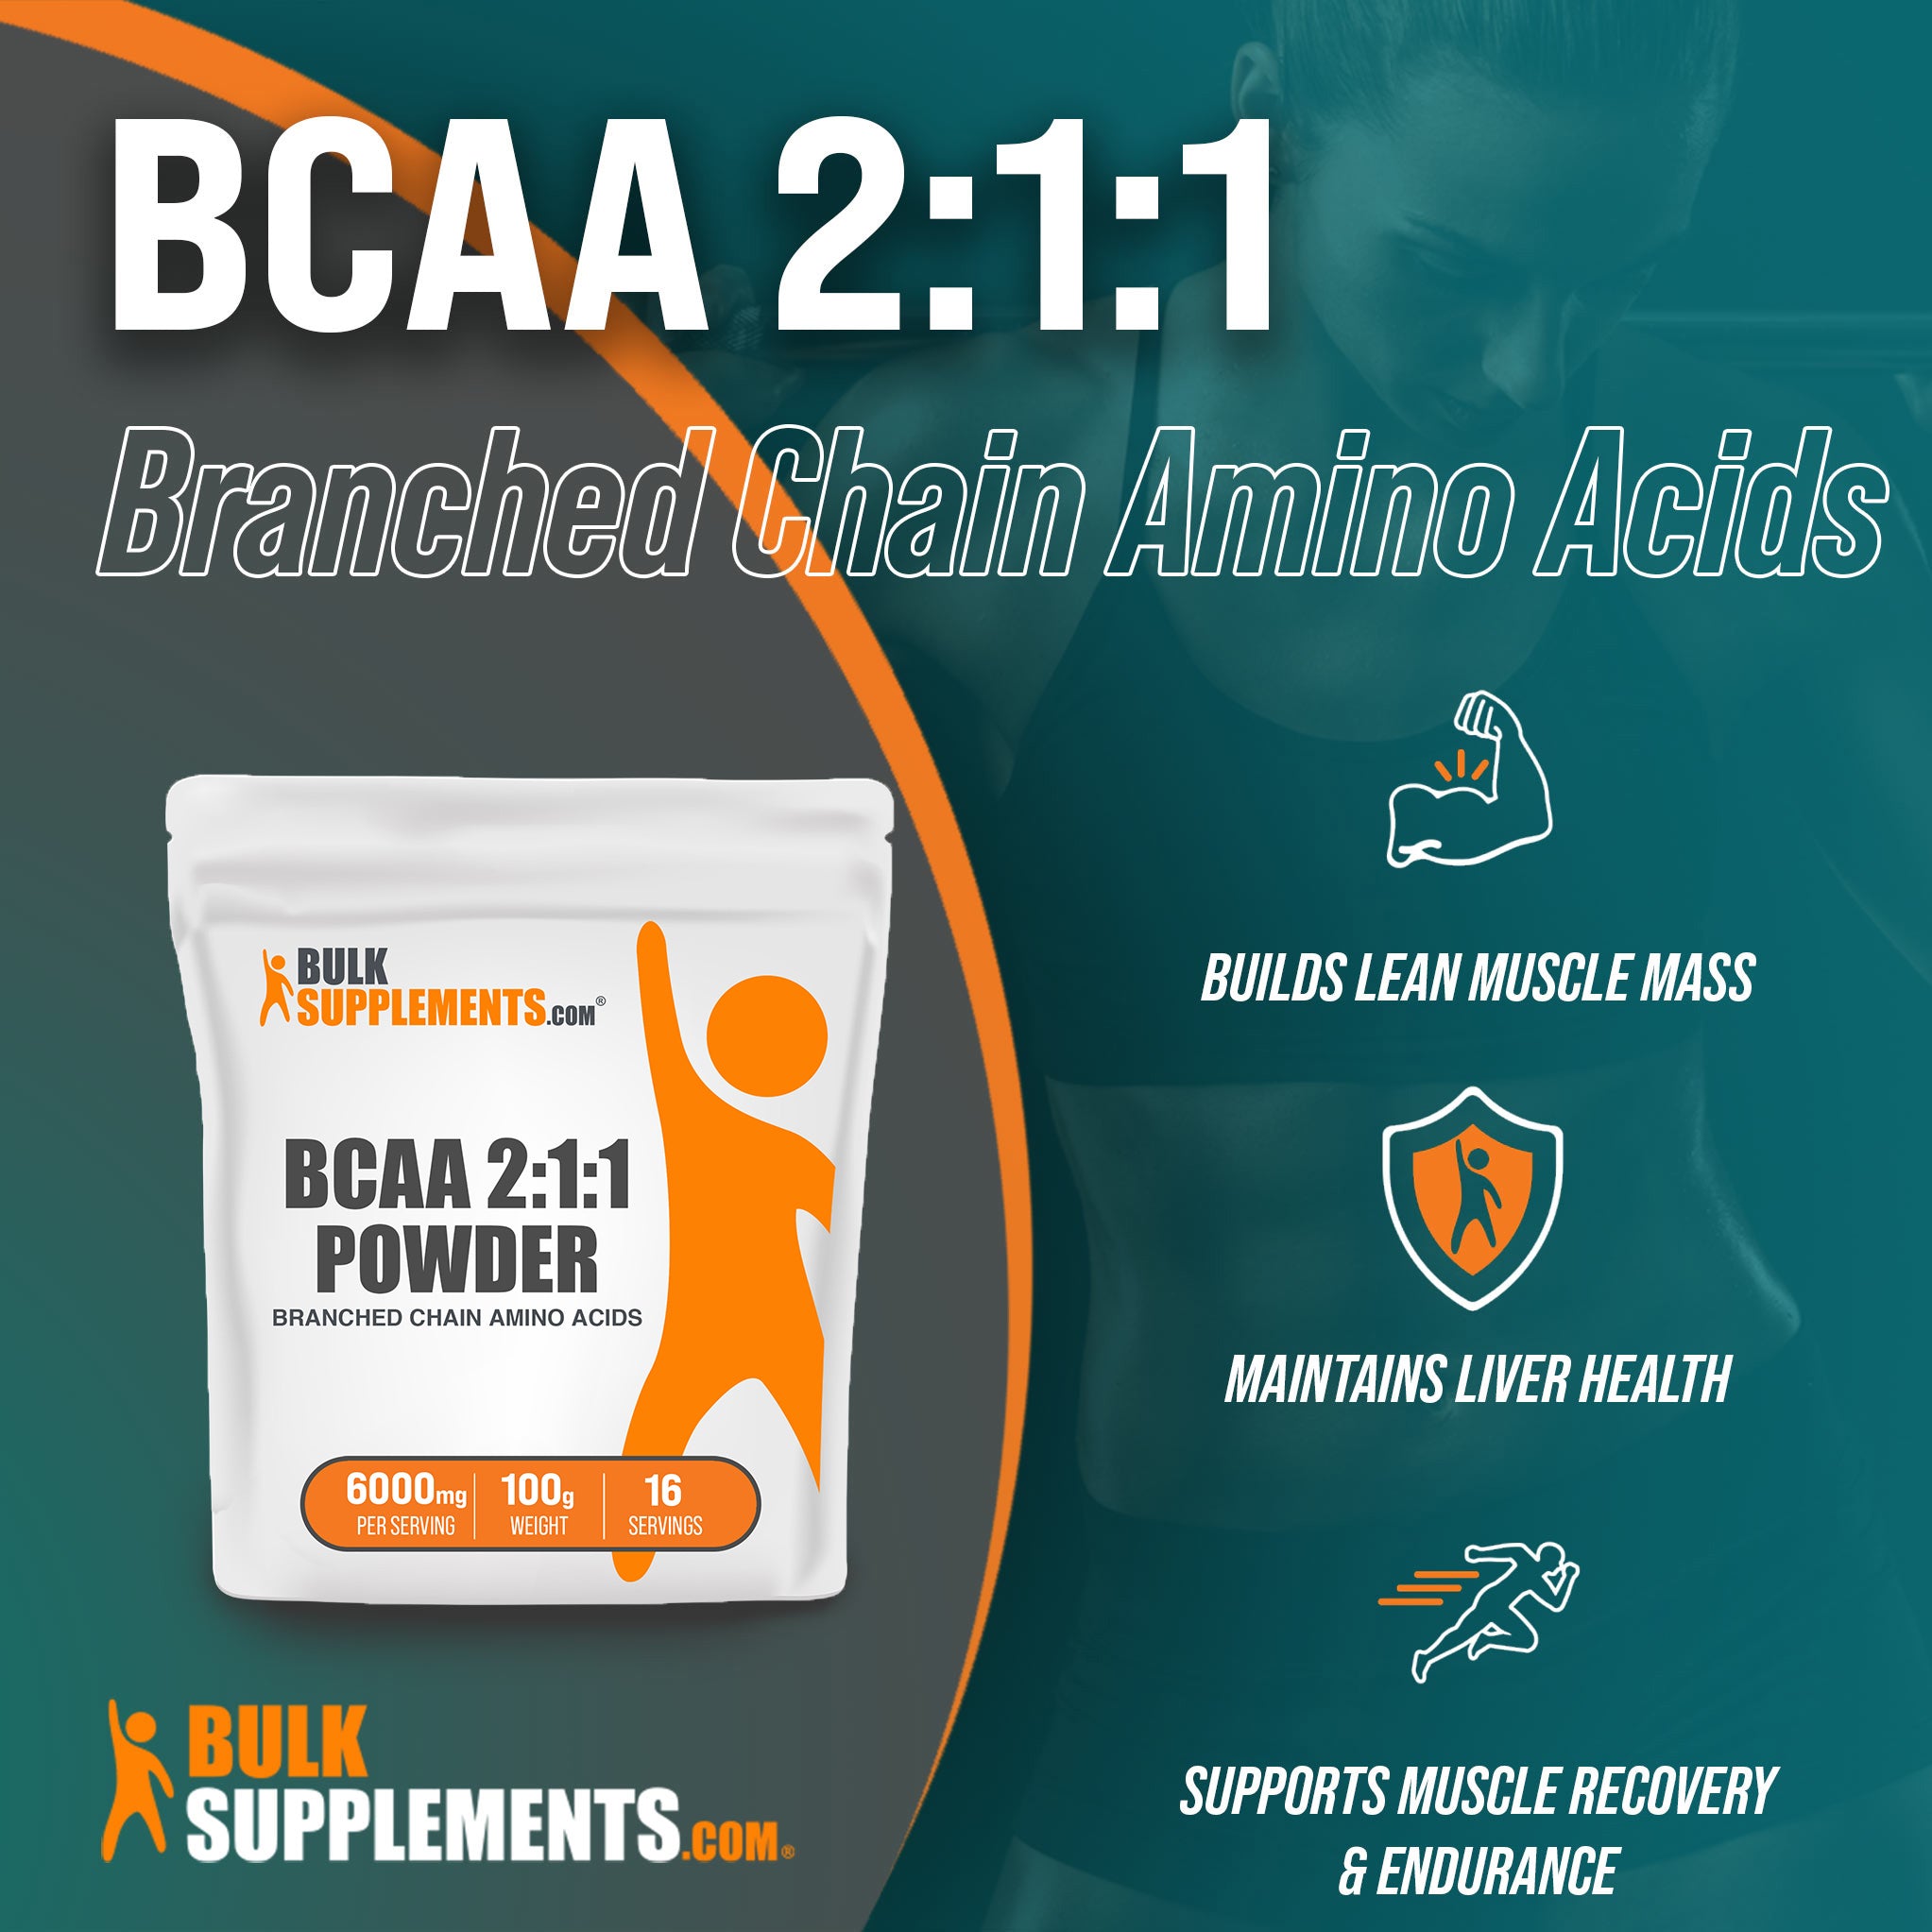 BCAA (Branched Chain Amino Acids) 2:1:1 Powder from Bulk Supplements for building lean muscle mass